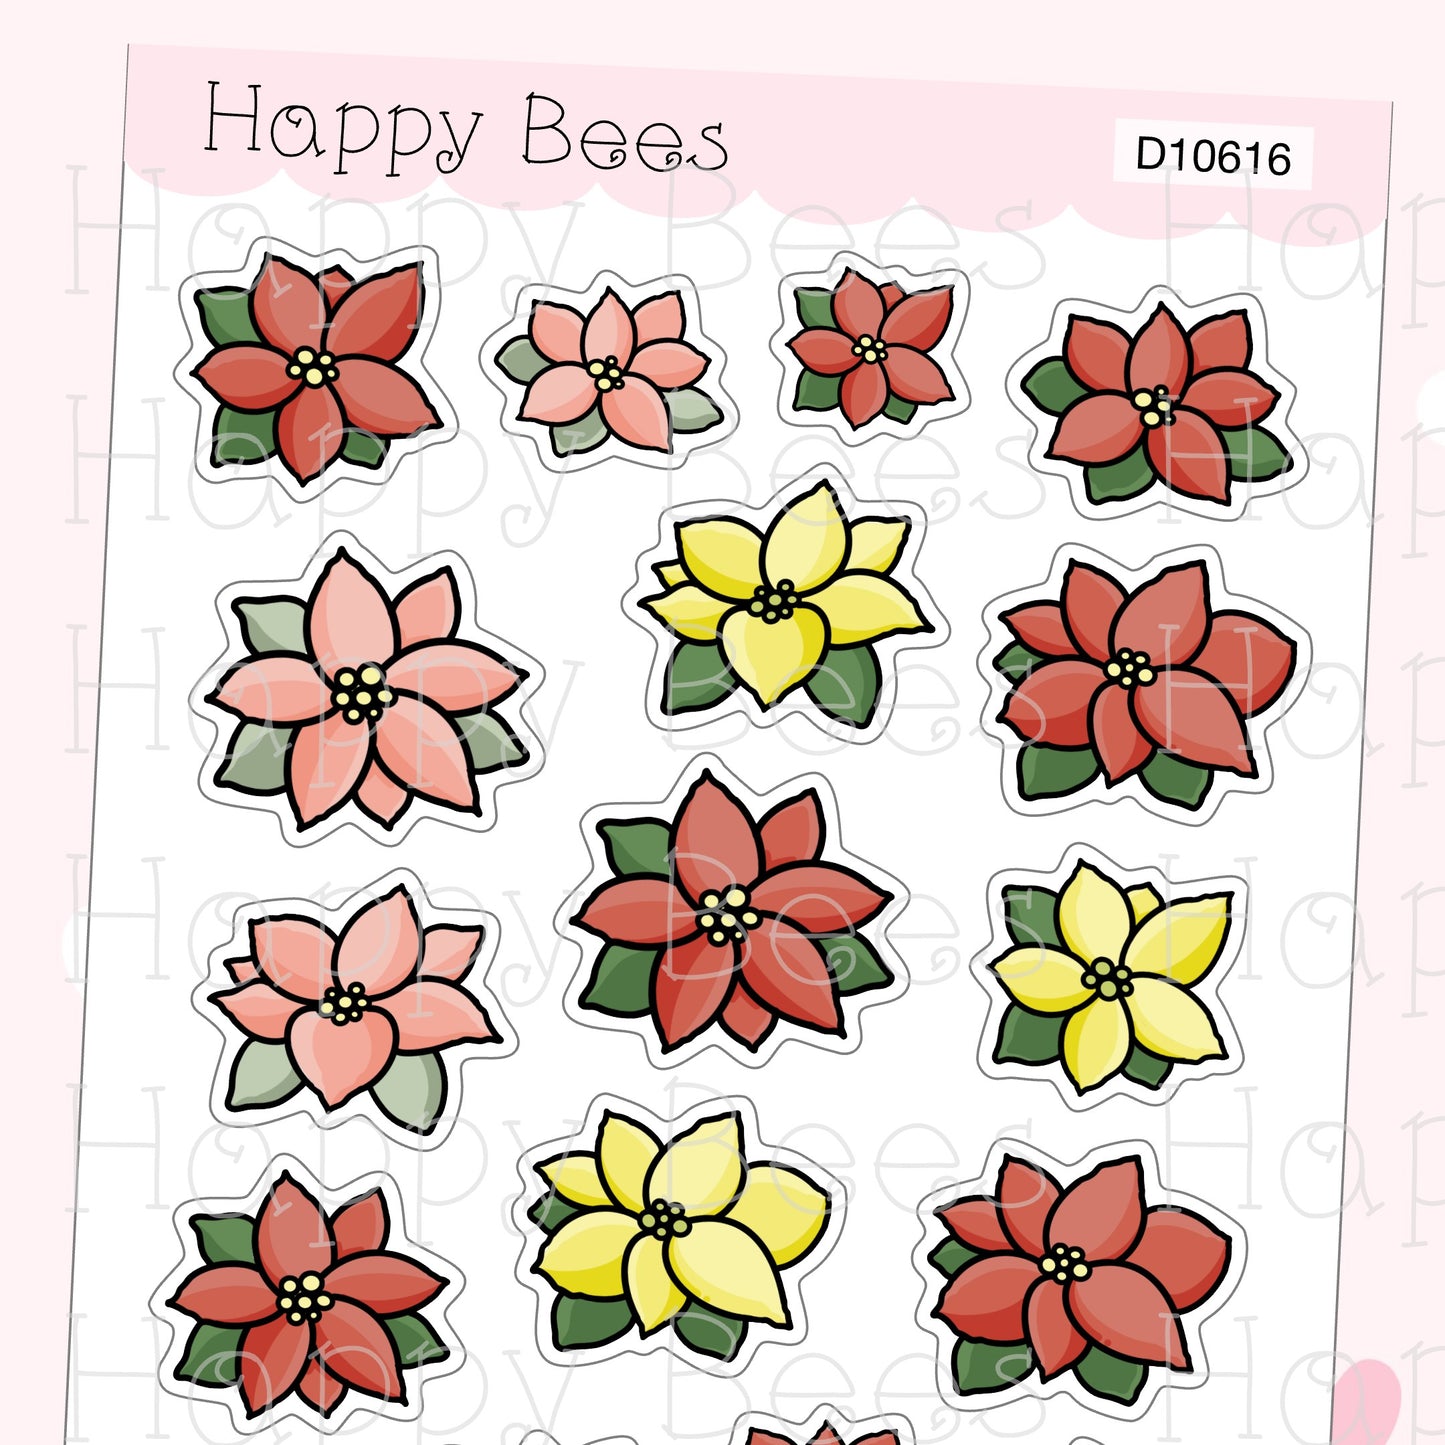 Poinsettias Doodles - Cute Christmas Floral Winter Holiday Planner Stickers D10616